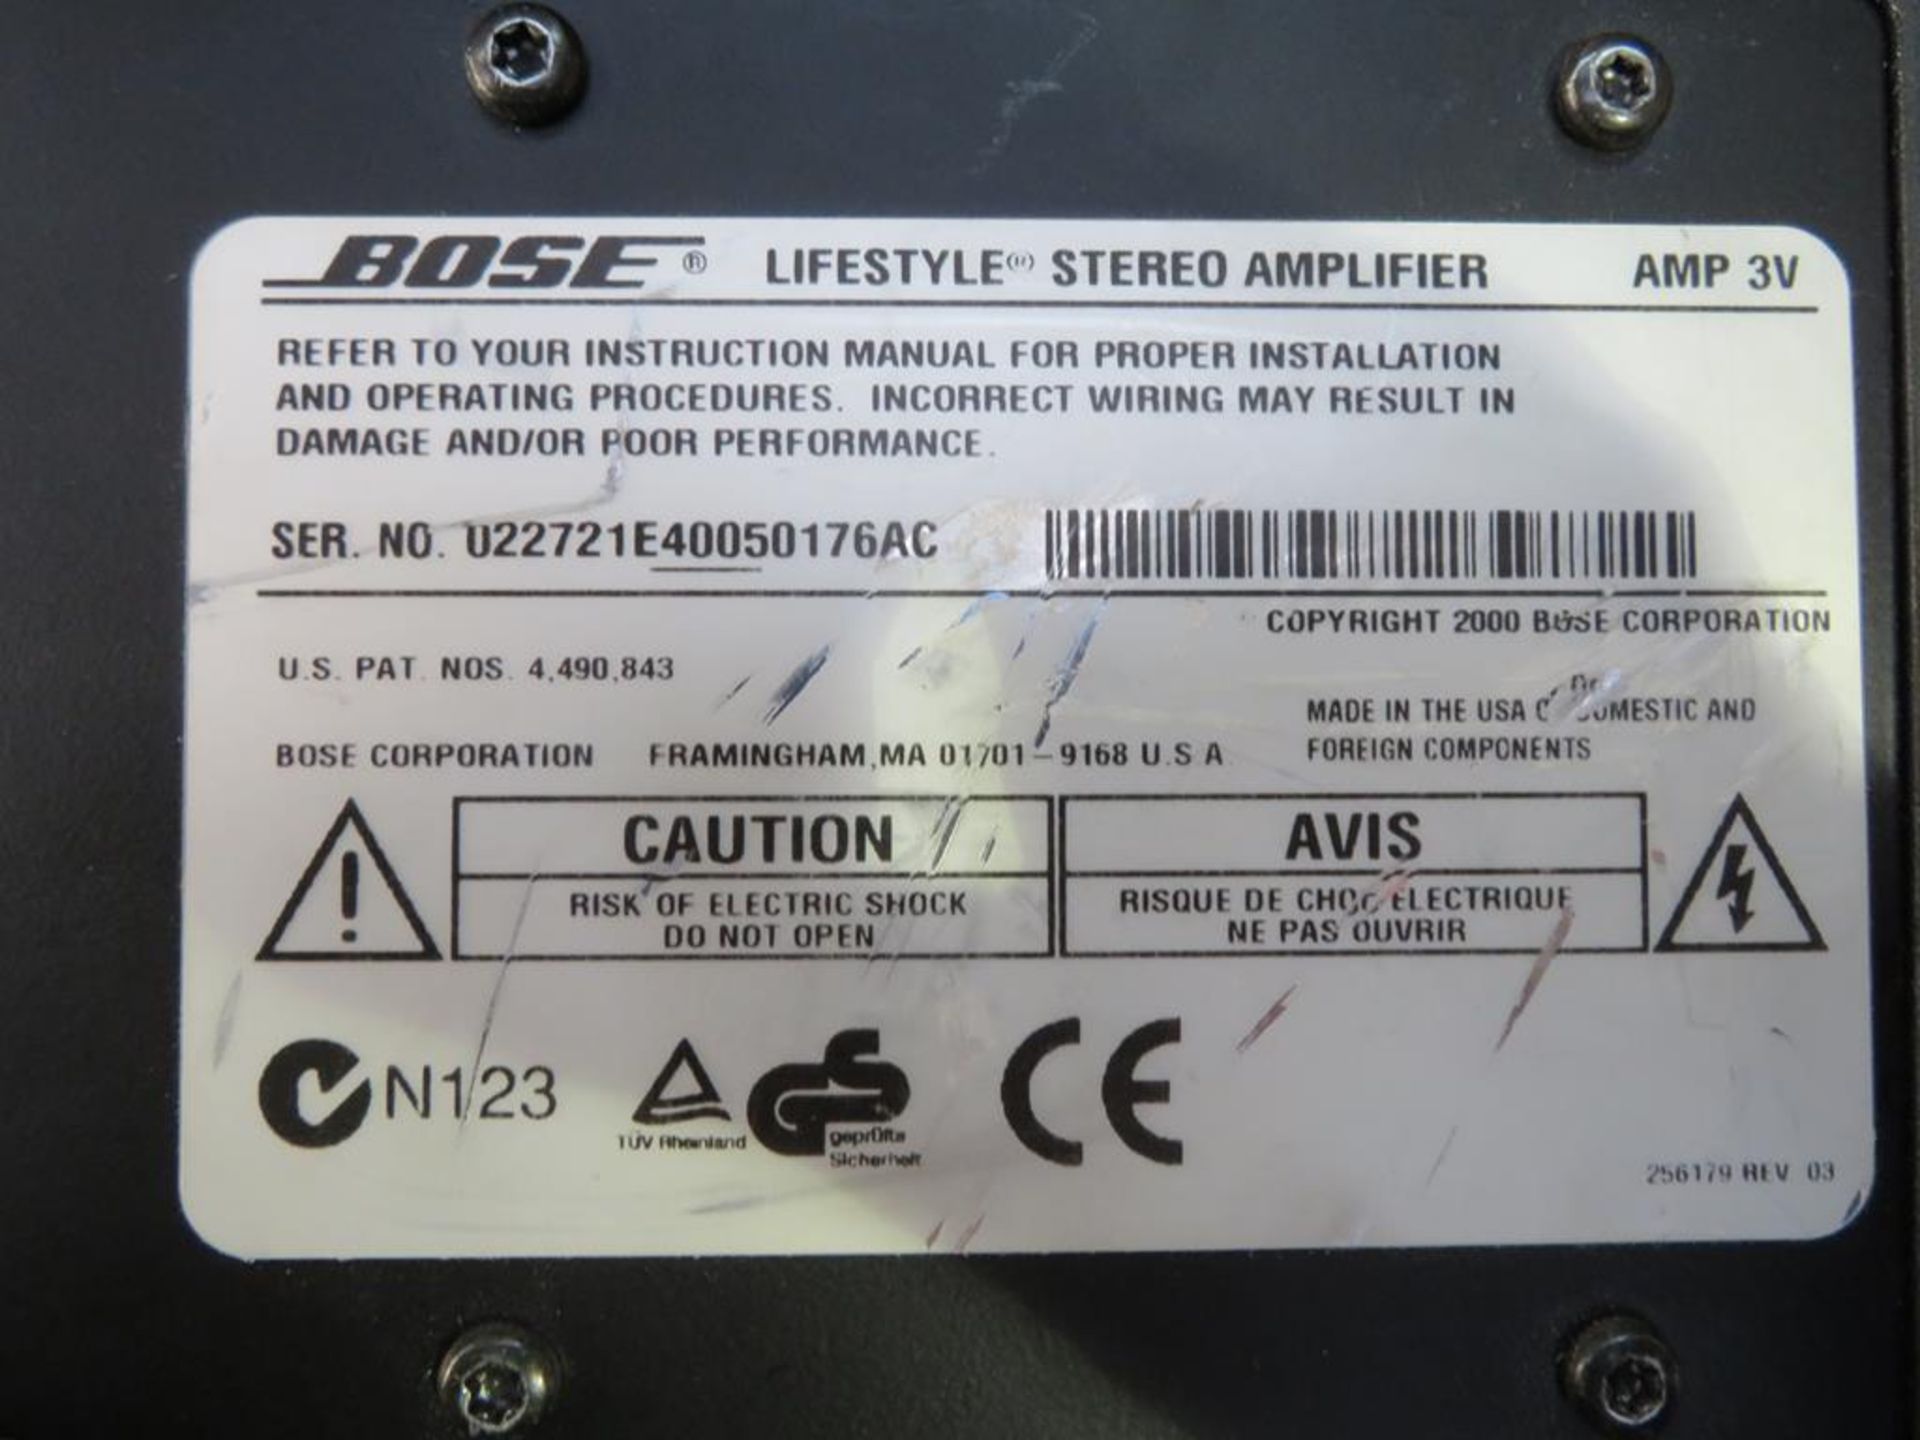 3 x Bose Lifestyle Stereo Amplifiers - Image 3 of 5